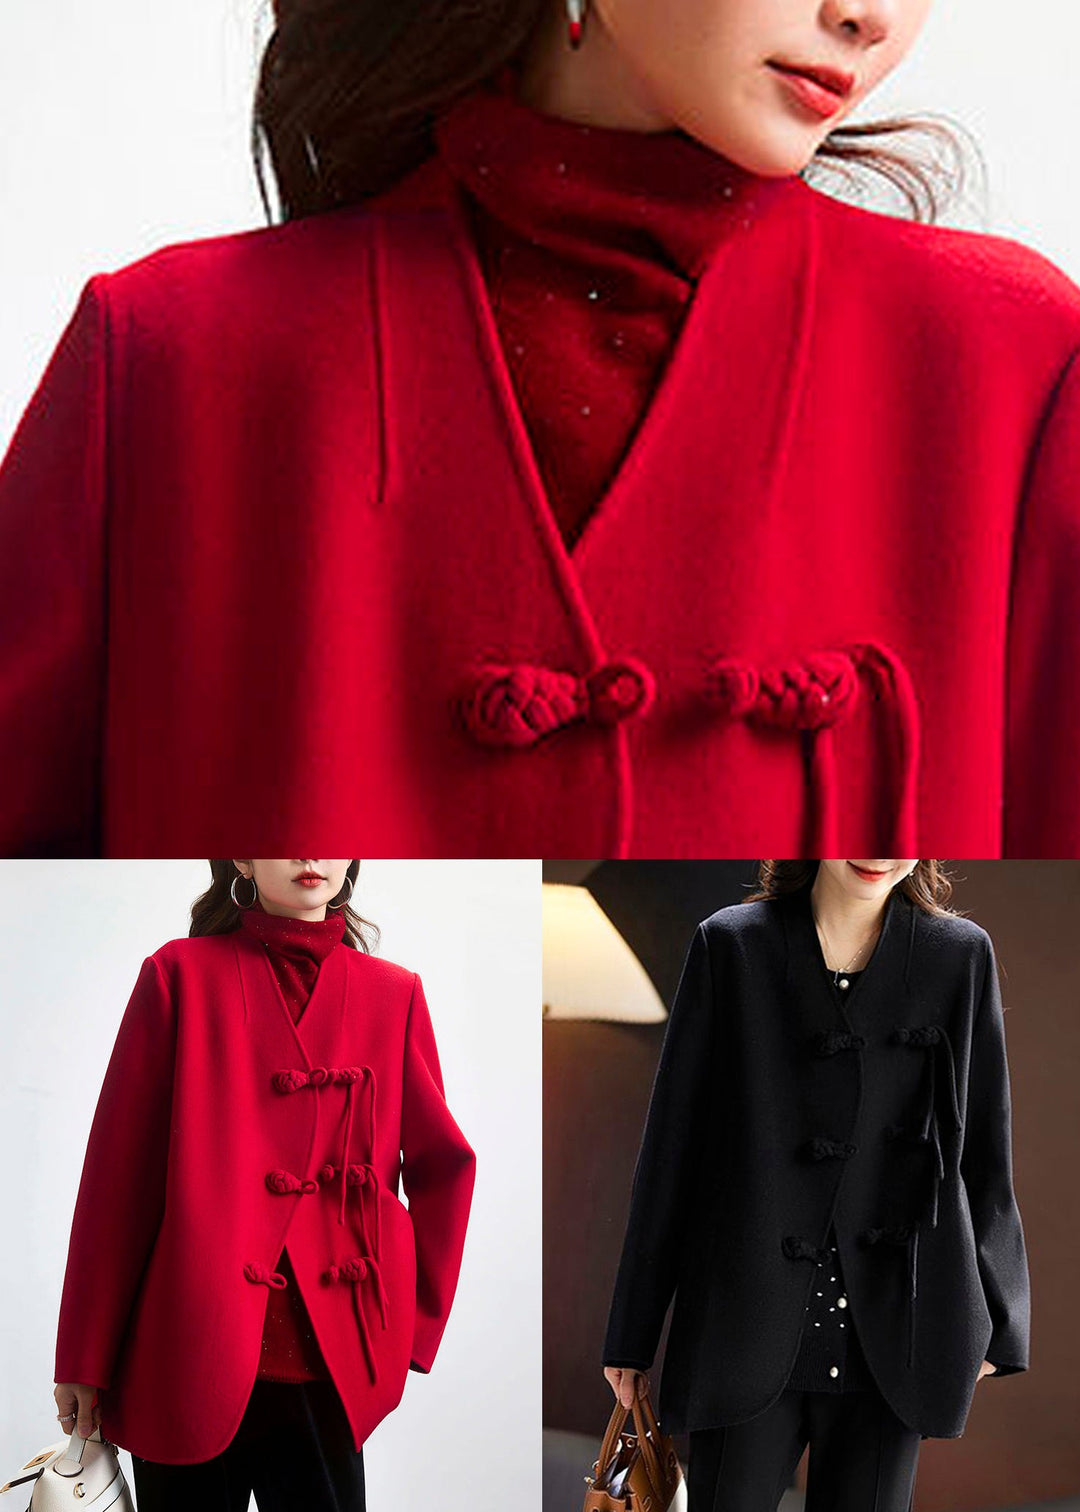 Red Button Patchwork Wool Coat V Neck Long Sleeve